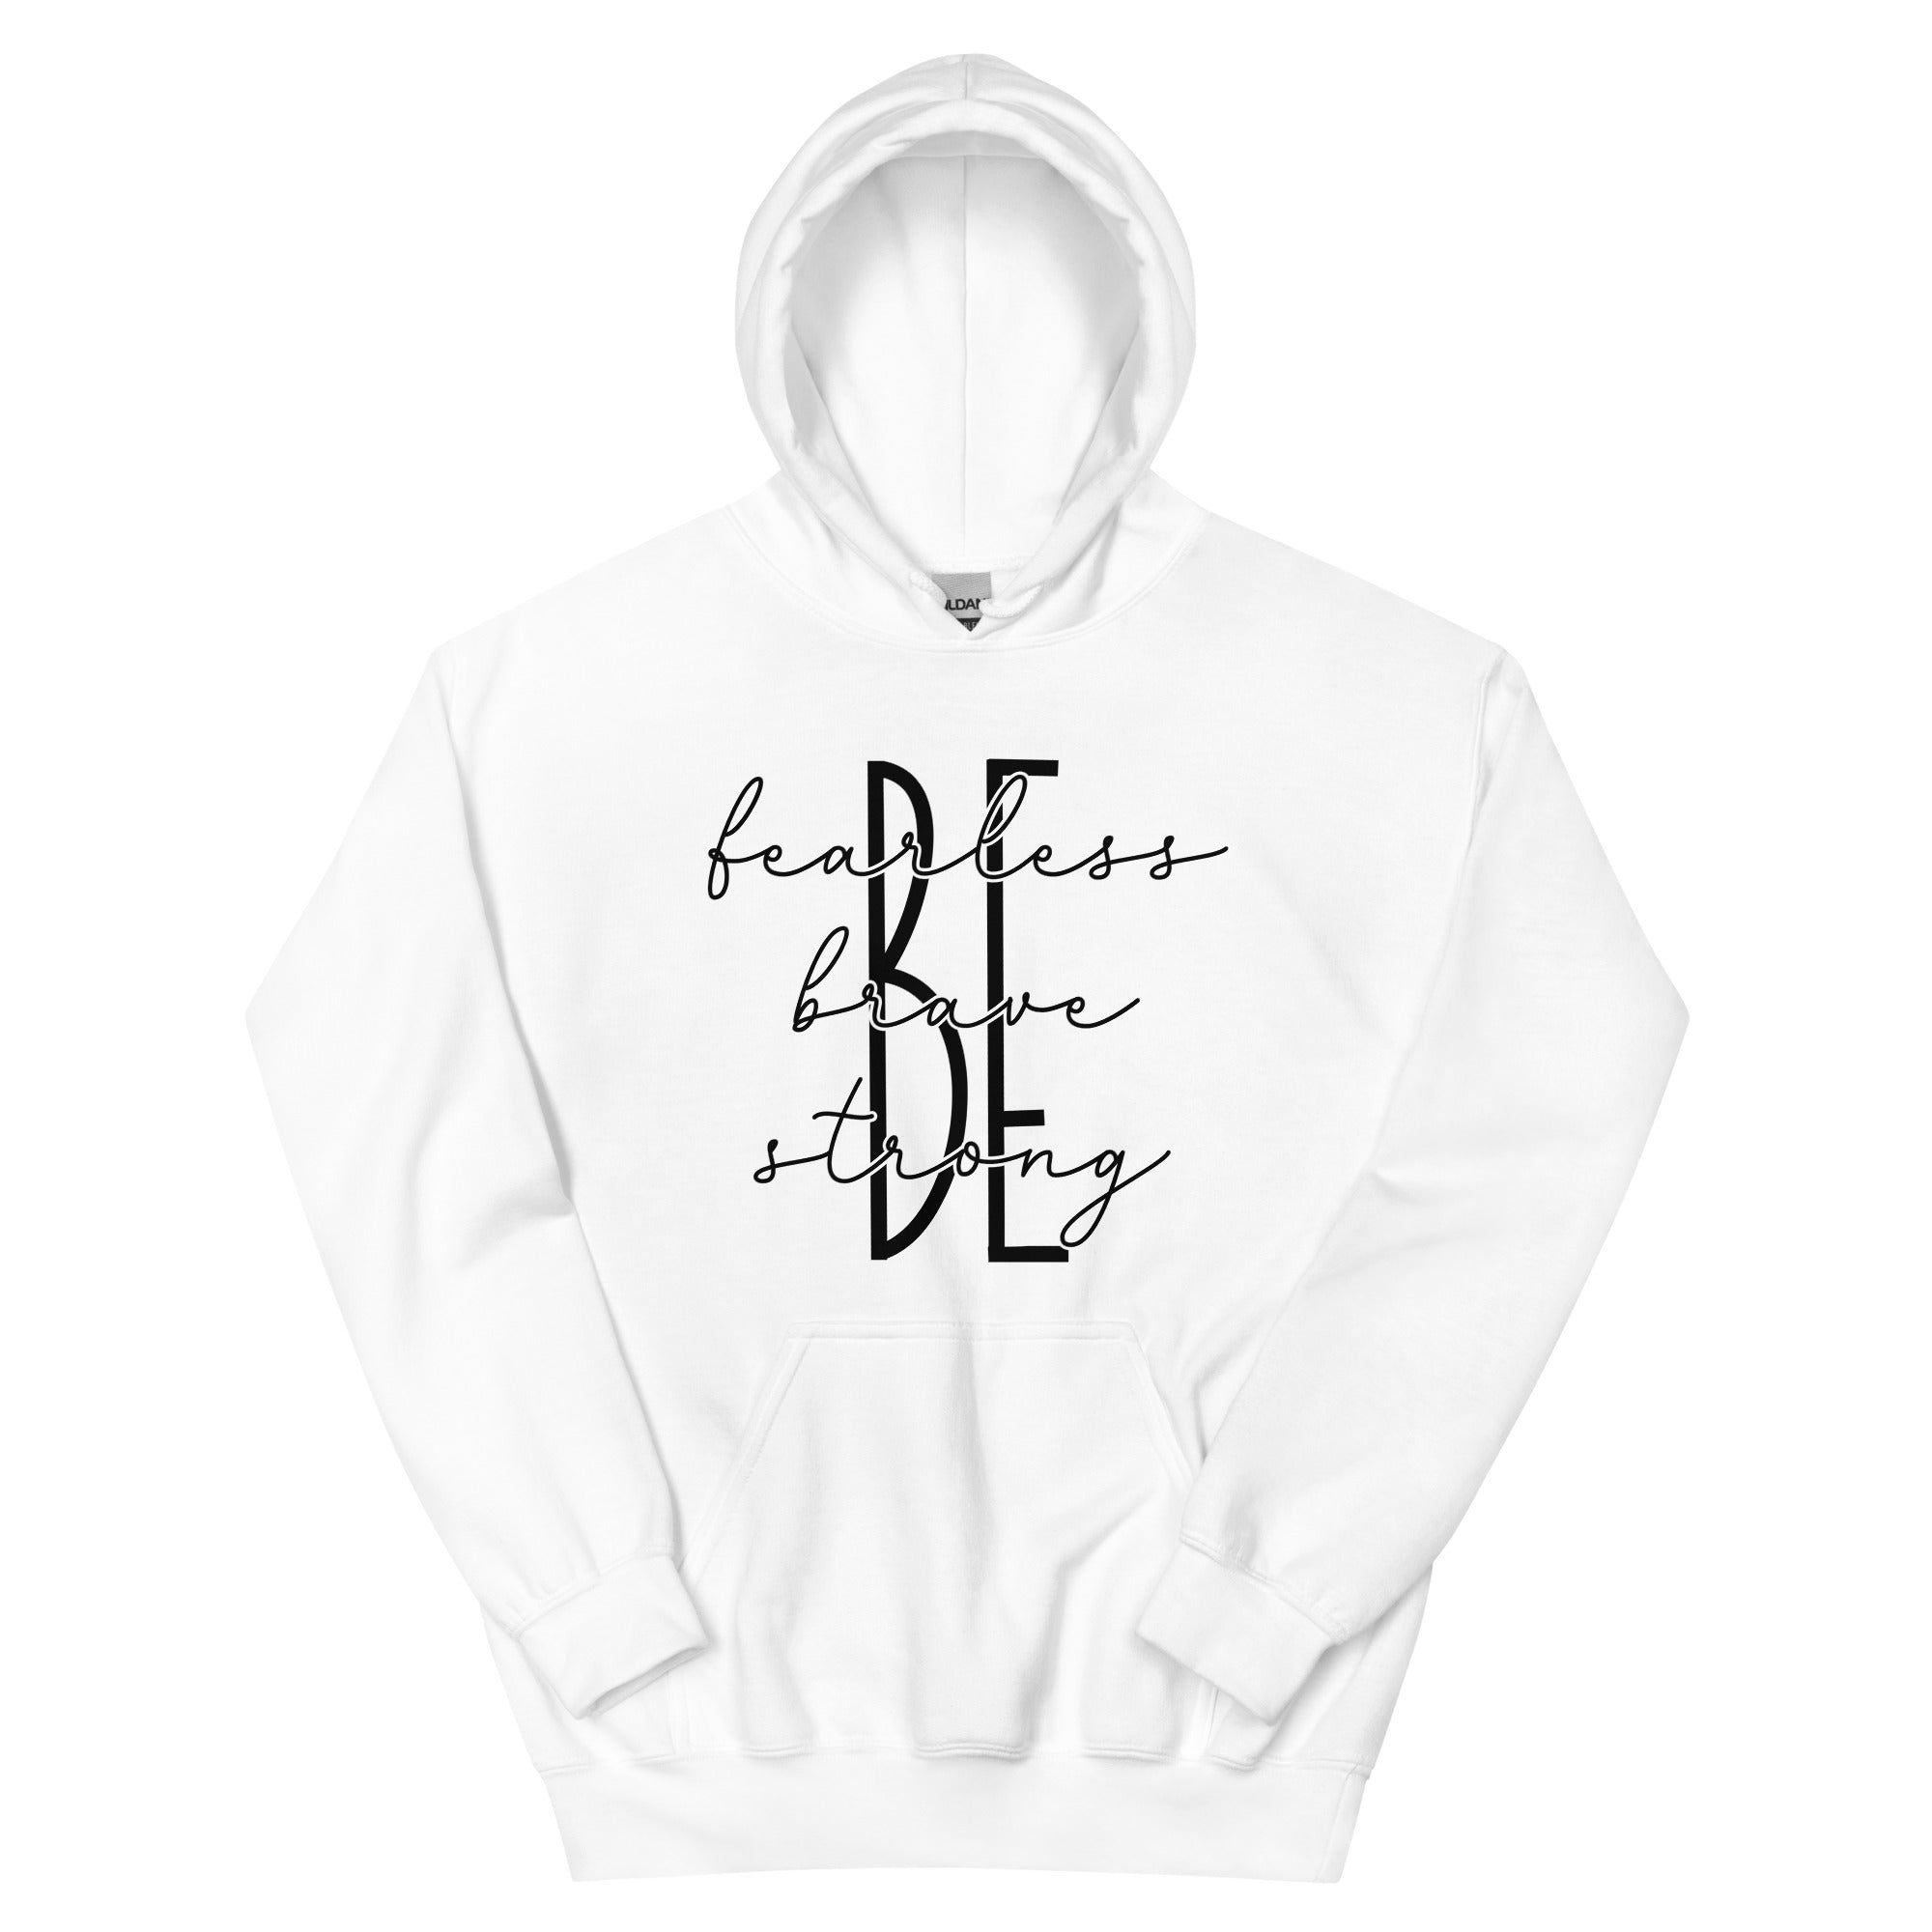 Be Fearless, Brave, Strong - Unisex Hoodie